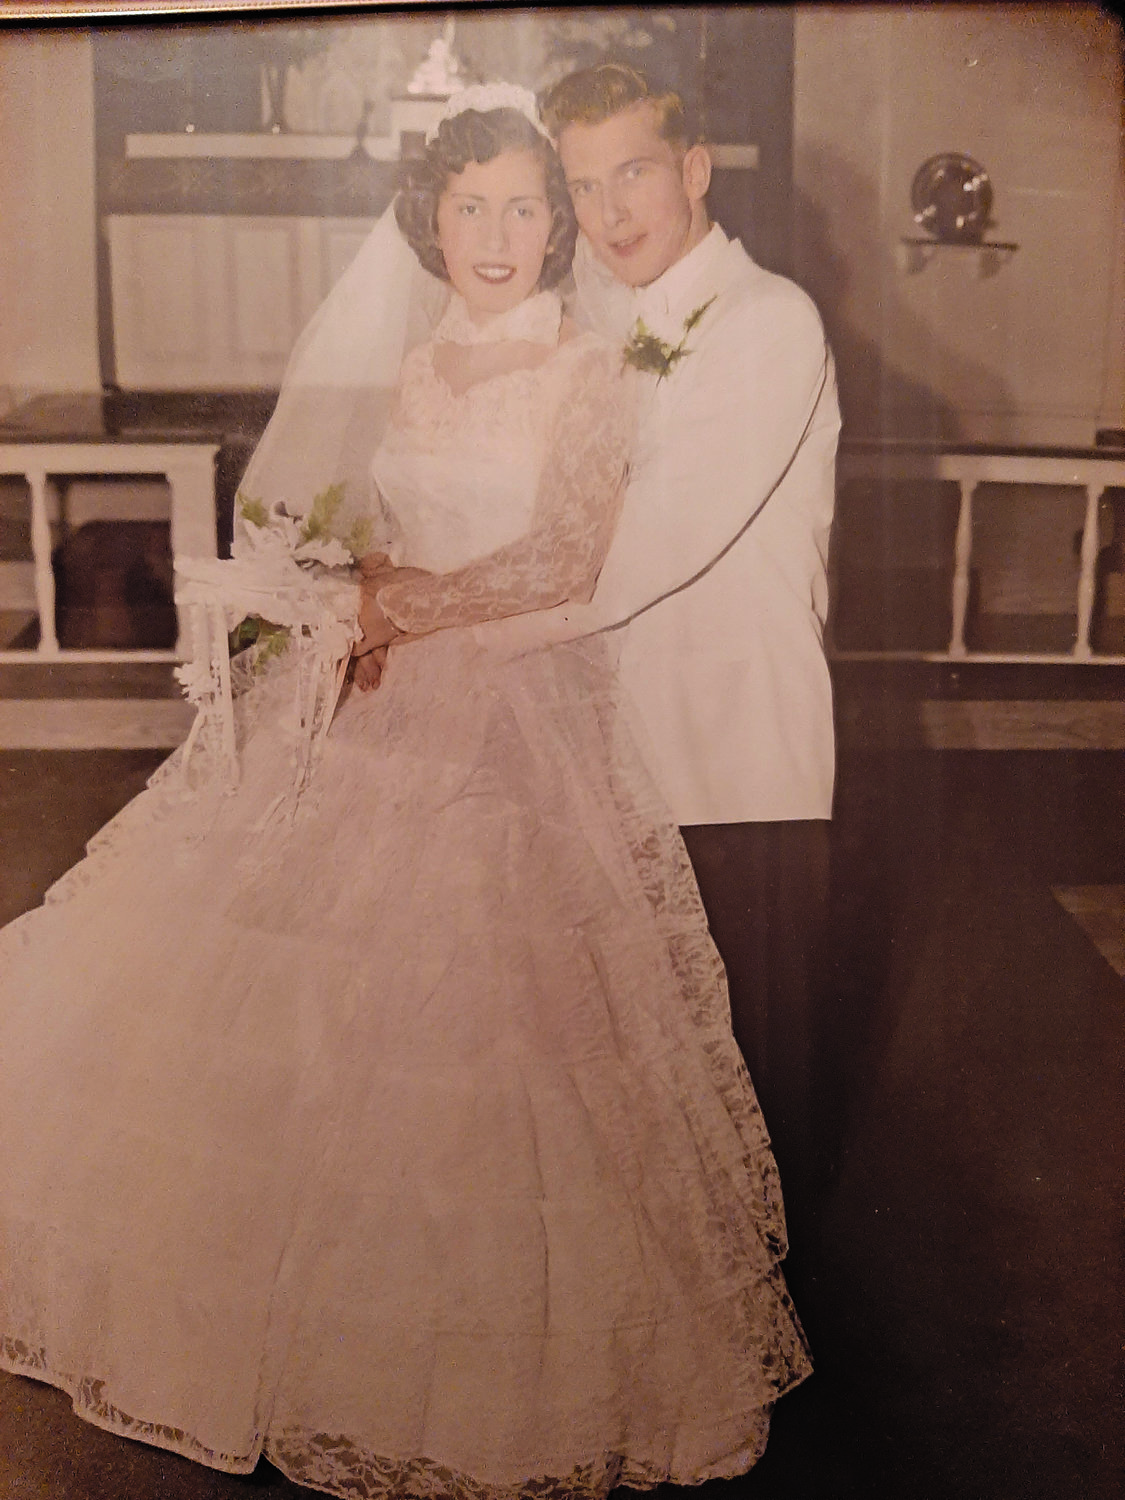 Rosemarie Tornetta and Edward Luecke were photographed at their wedding in 1956.